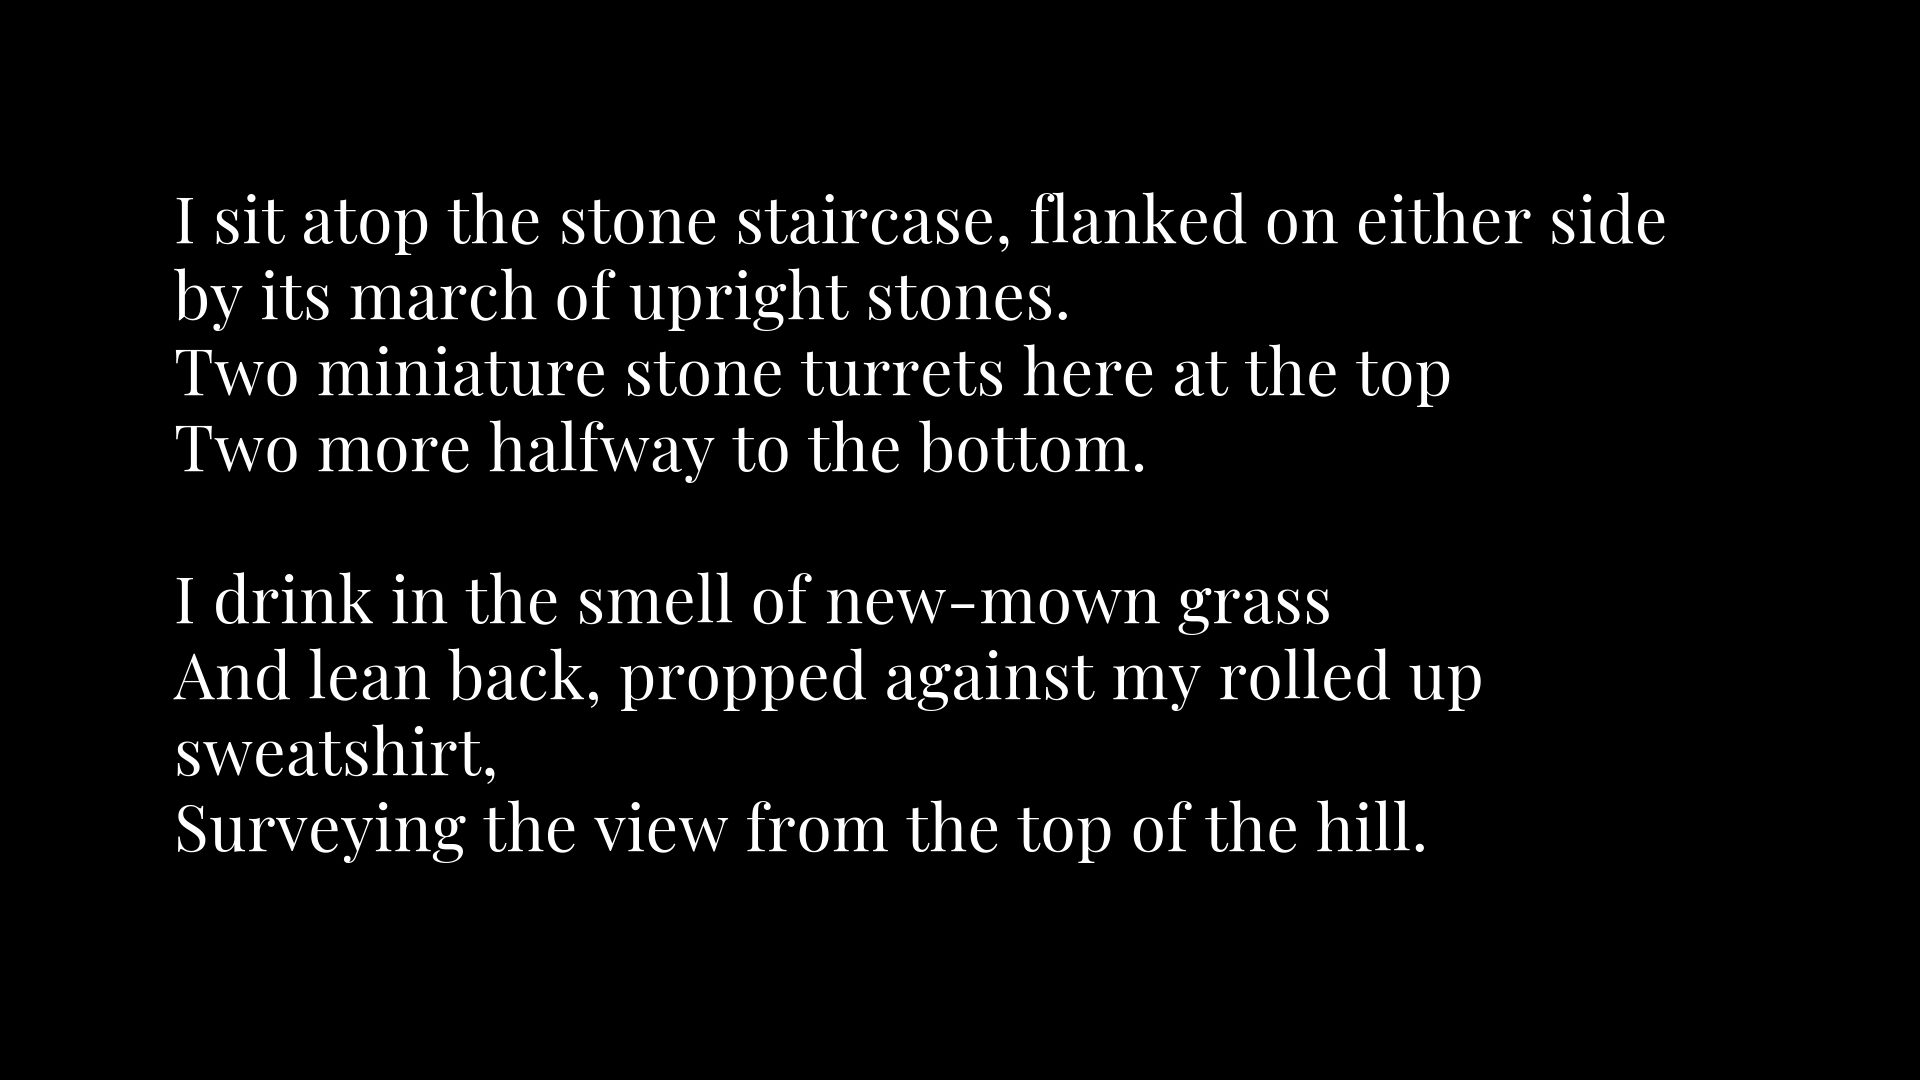 A poem about the stone staircase and grass.